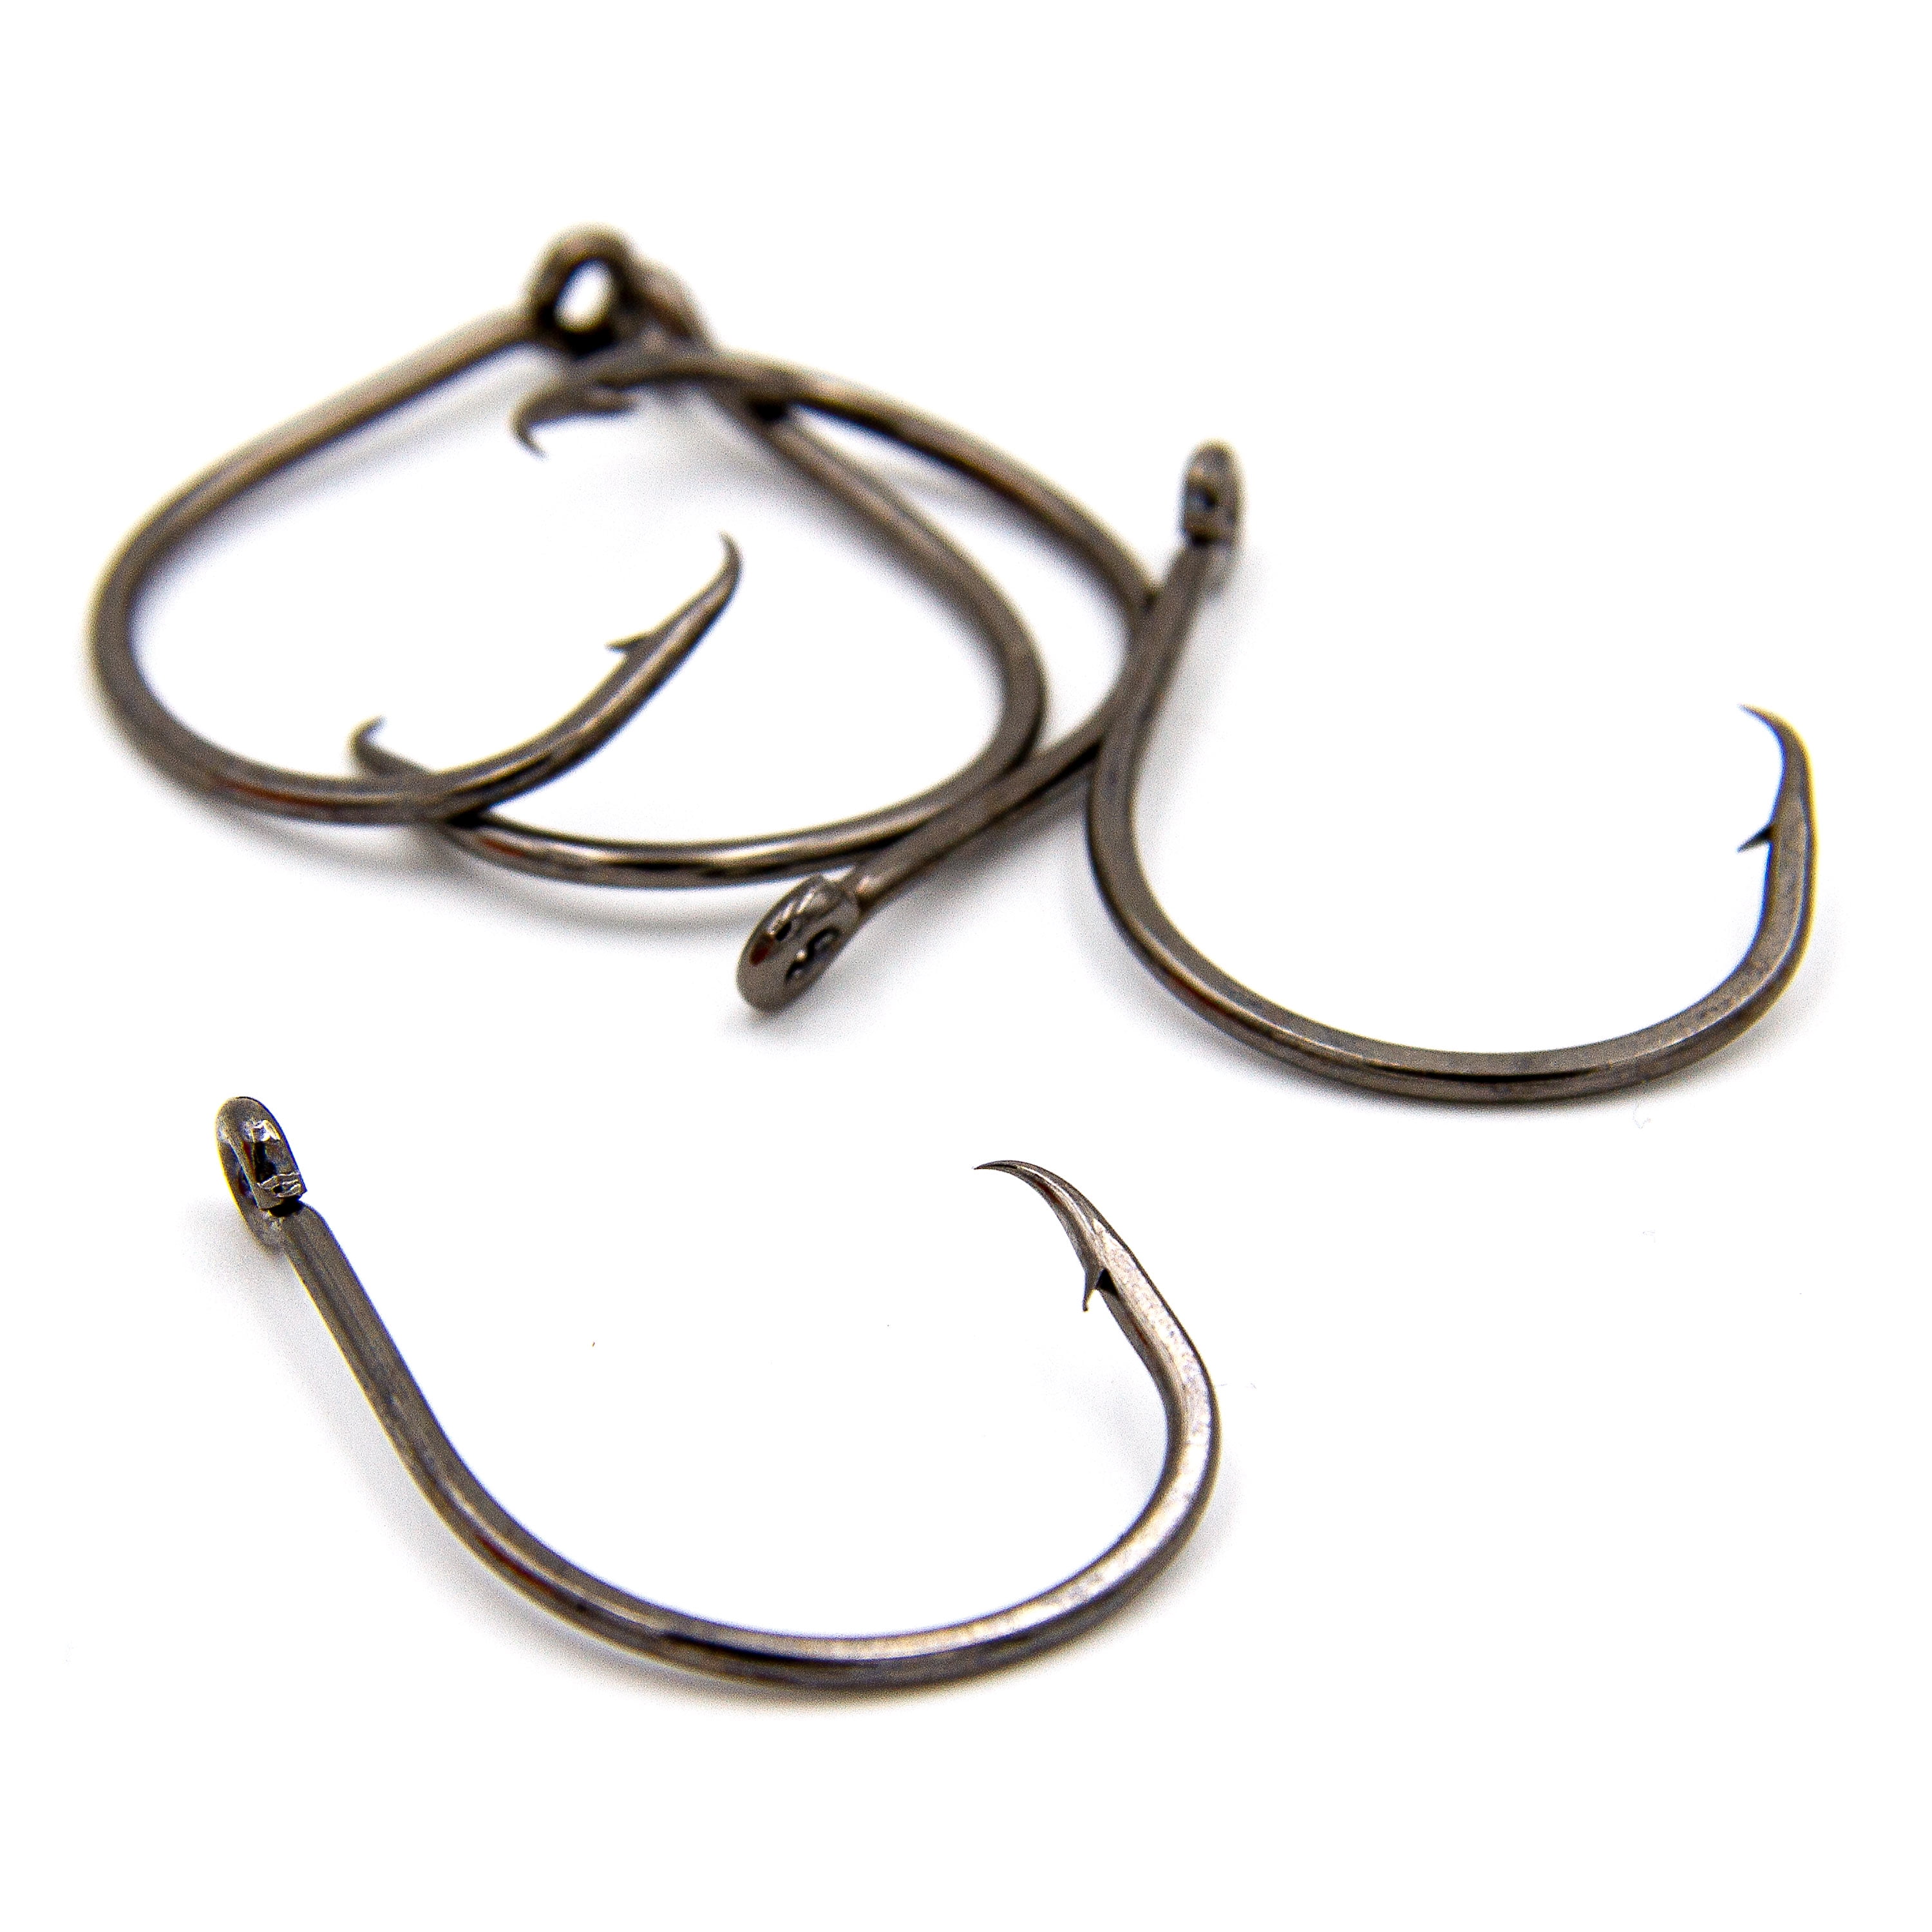 Keenso Stainless Steel Carp Fishing Circle, Fishing Accessory, 3.5